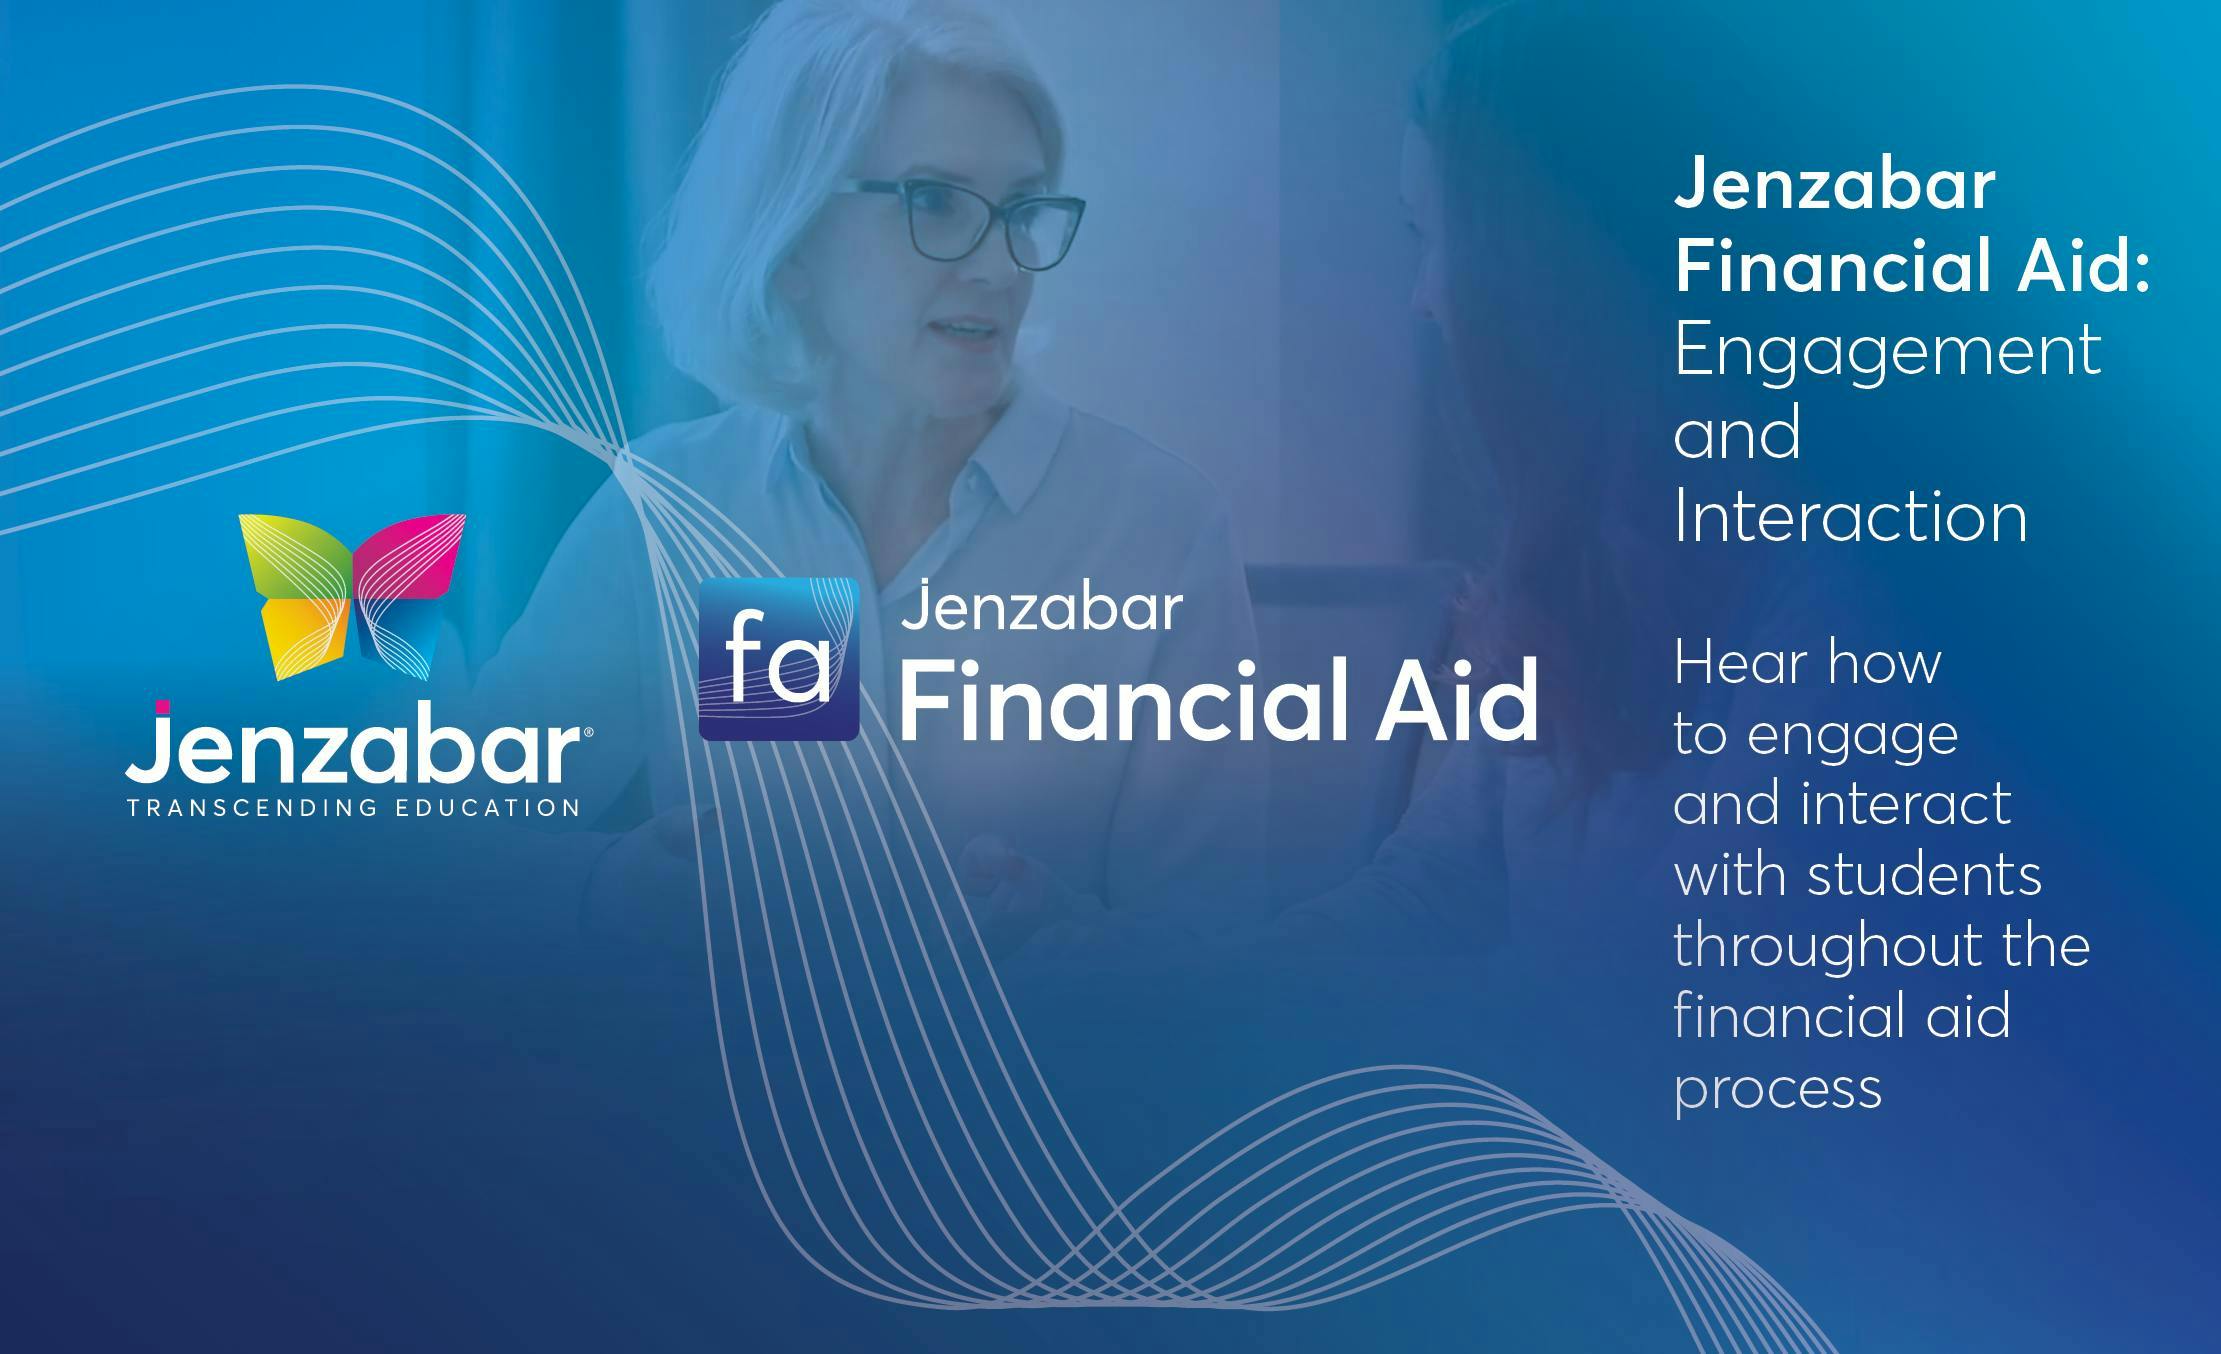 Video: Jenzabar Financial Aid: Engagement and Interaction